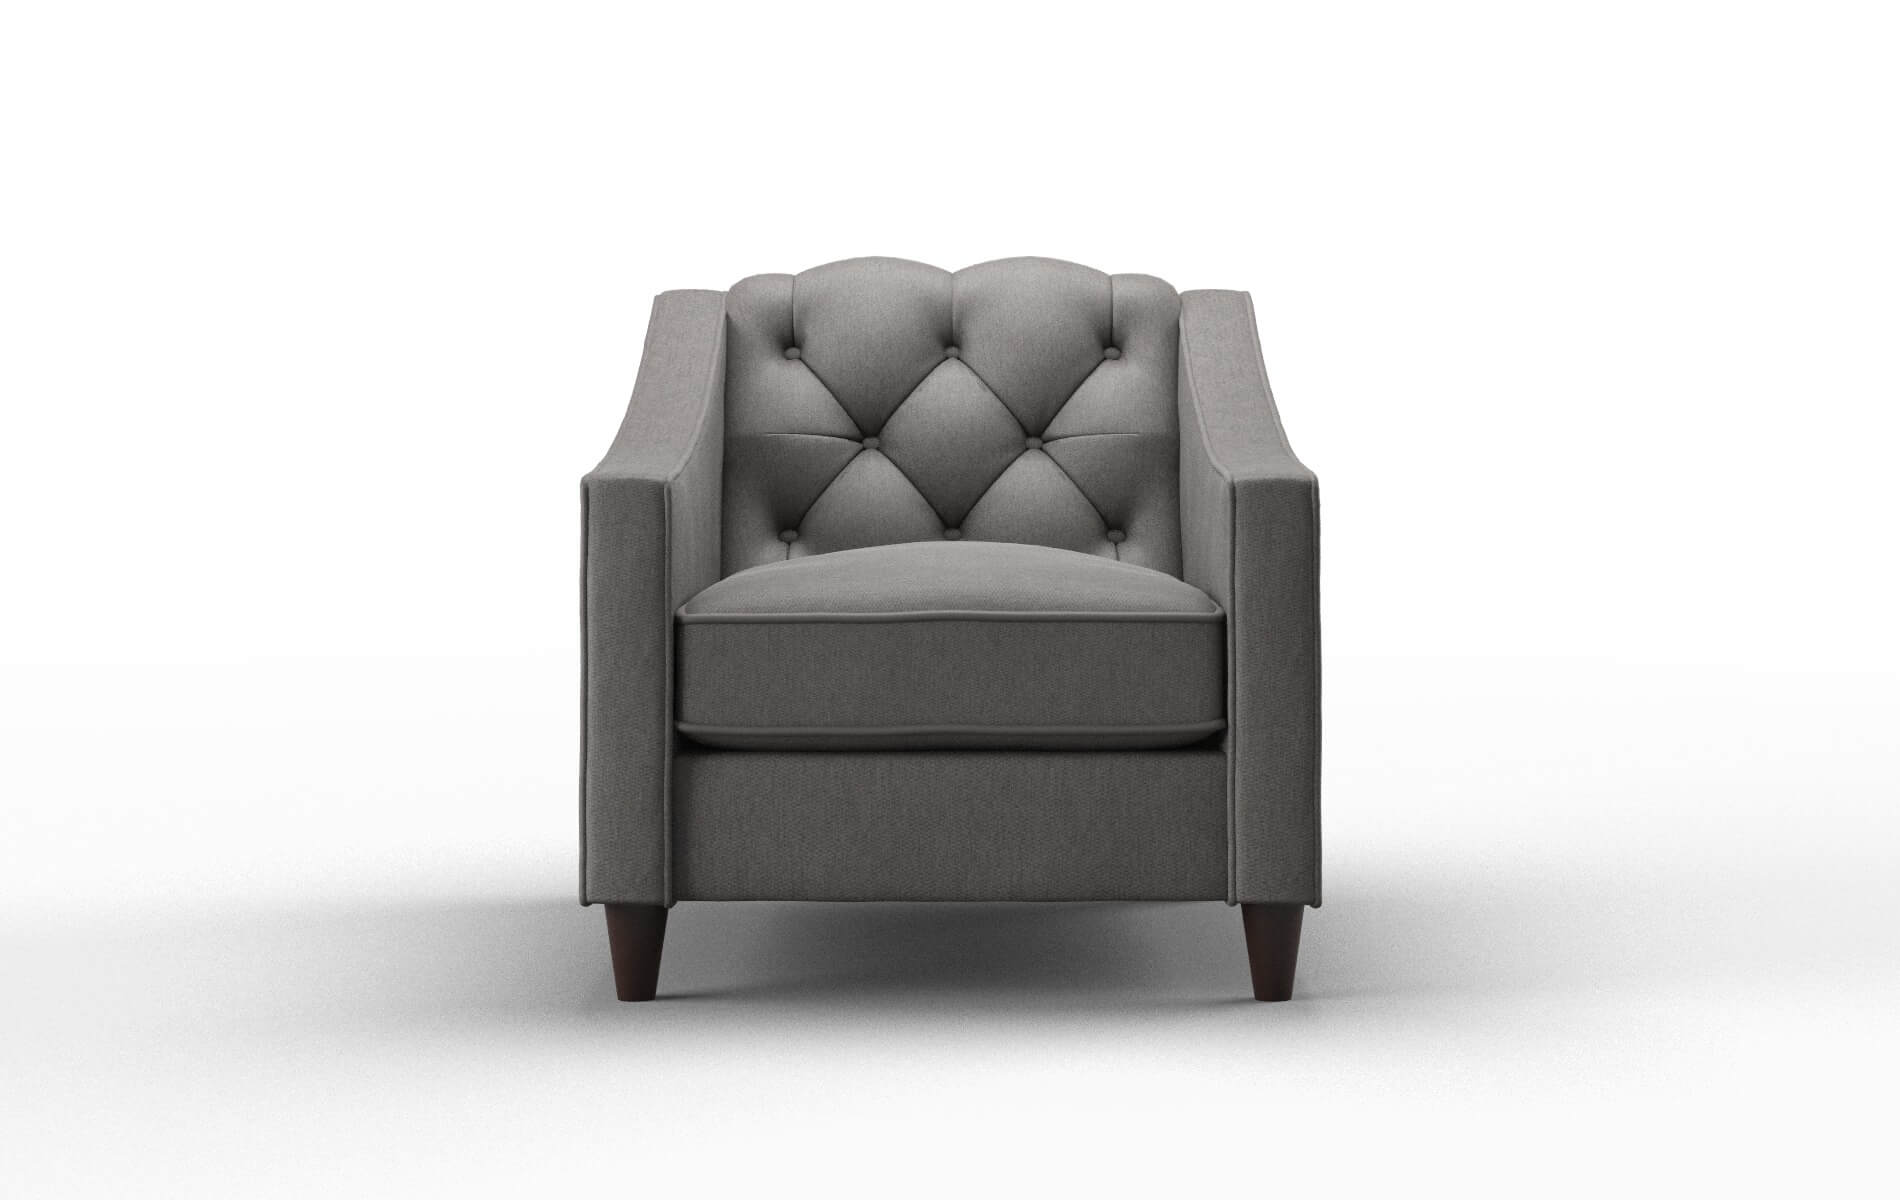 Manchester Cosmo Charcoal chair espresso legs